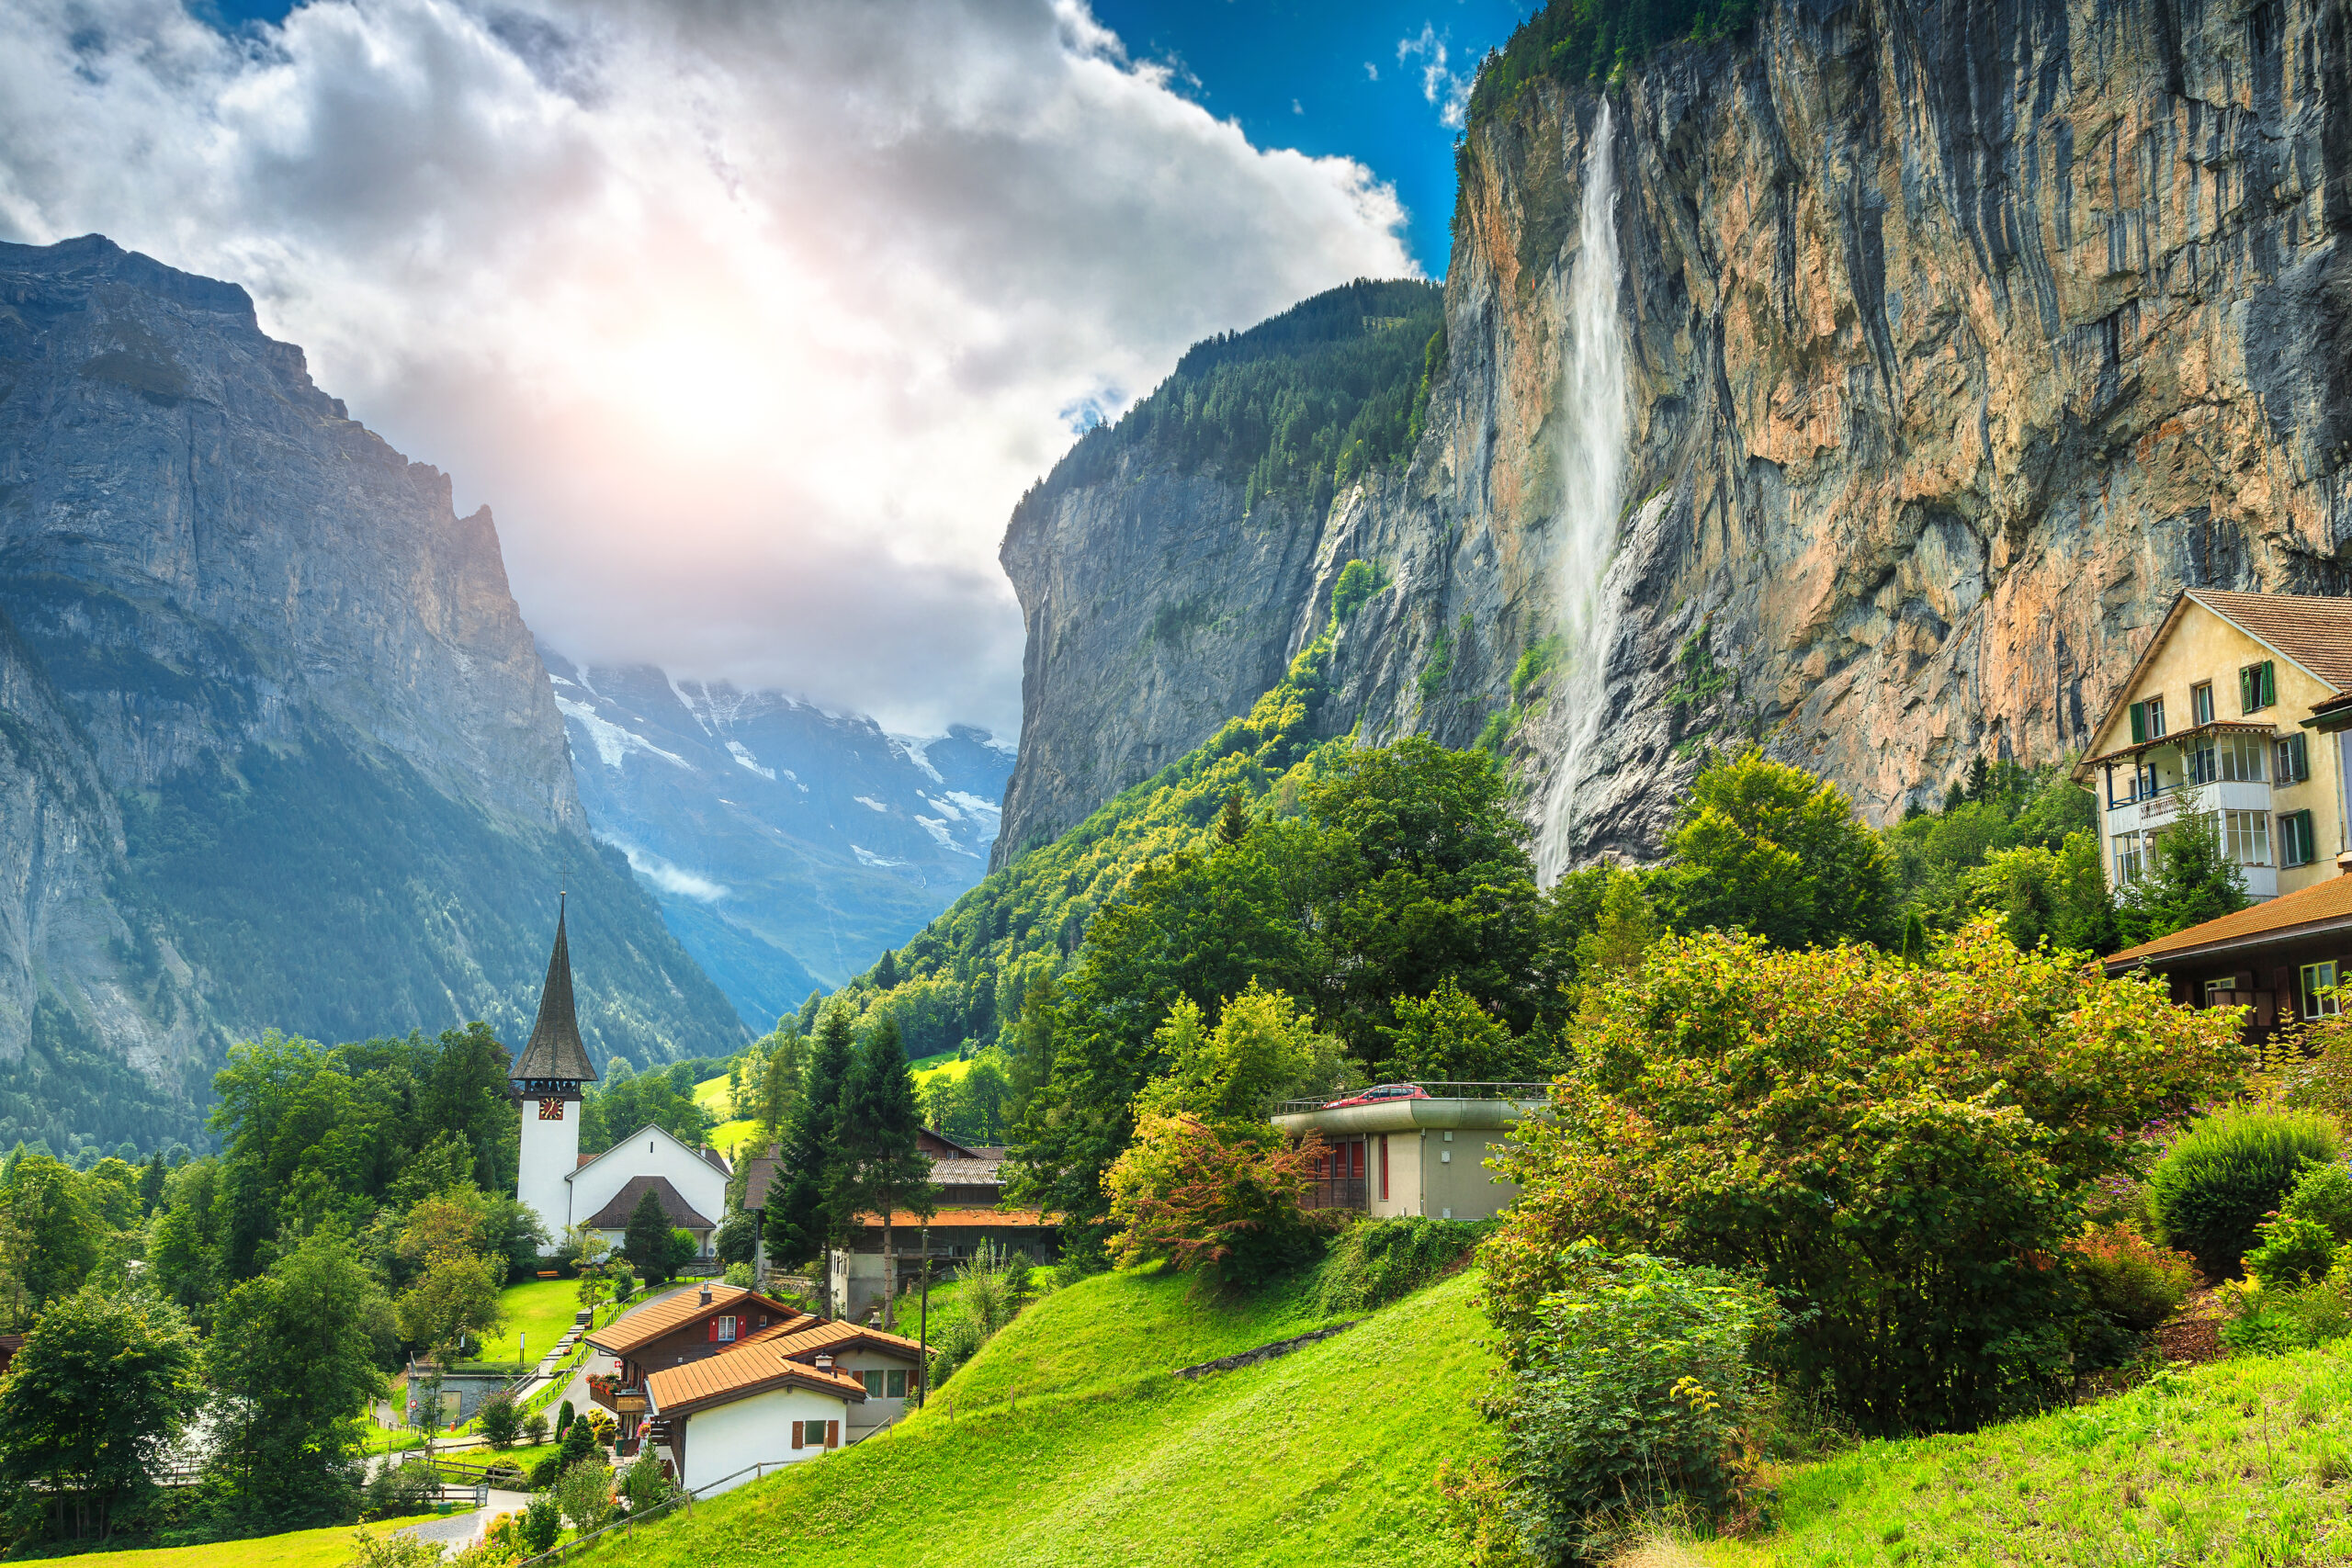 swiss-fixer-swixer-local-production-services-in-switzerland-mountain-village-with-high-cliffs-and-waterfalls